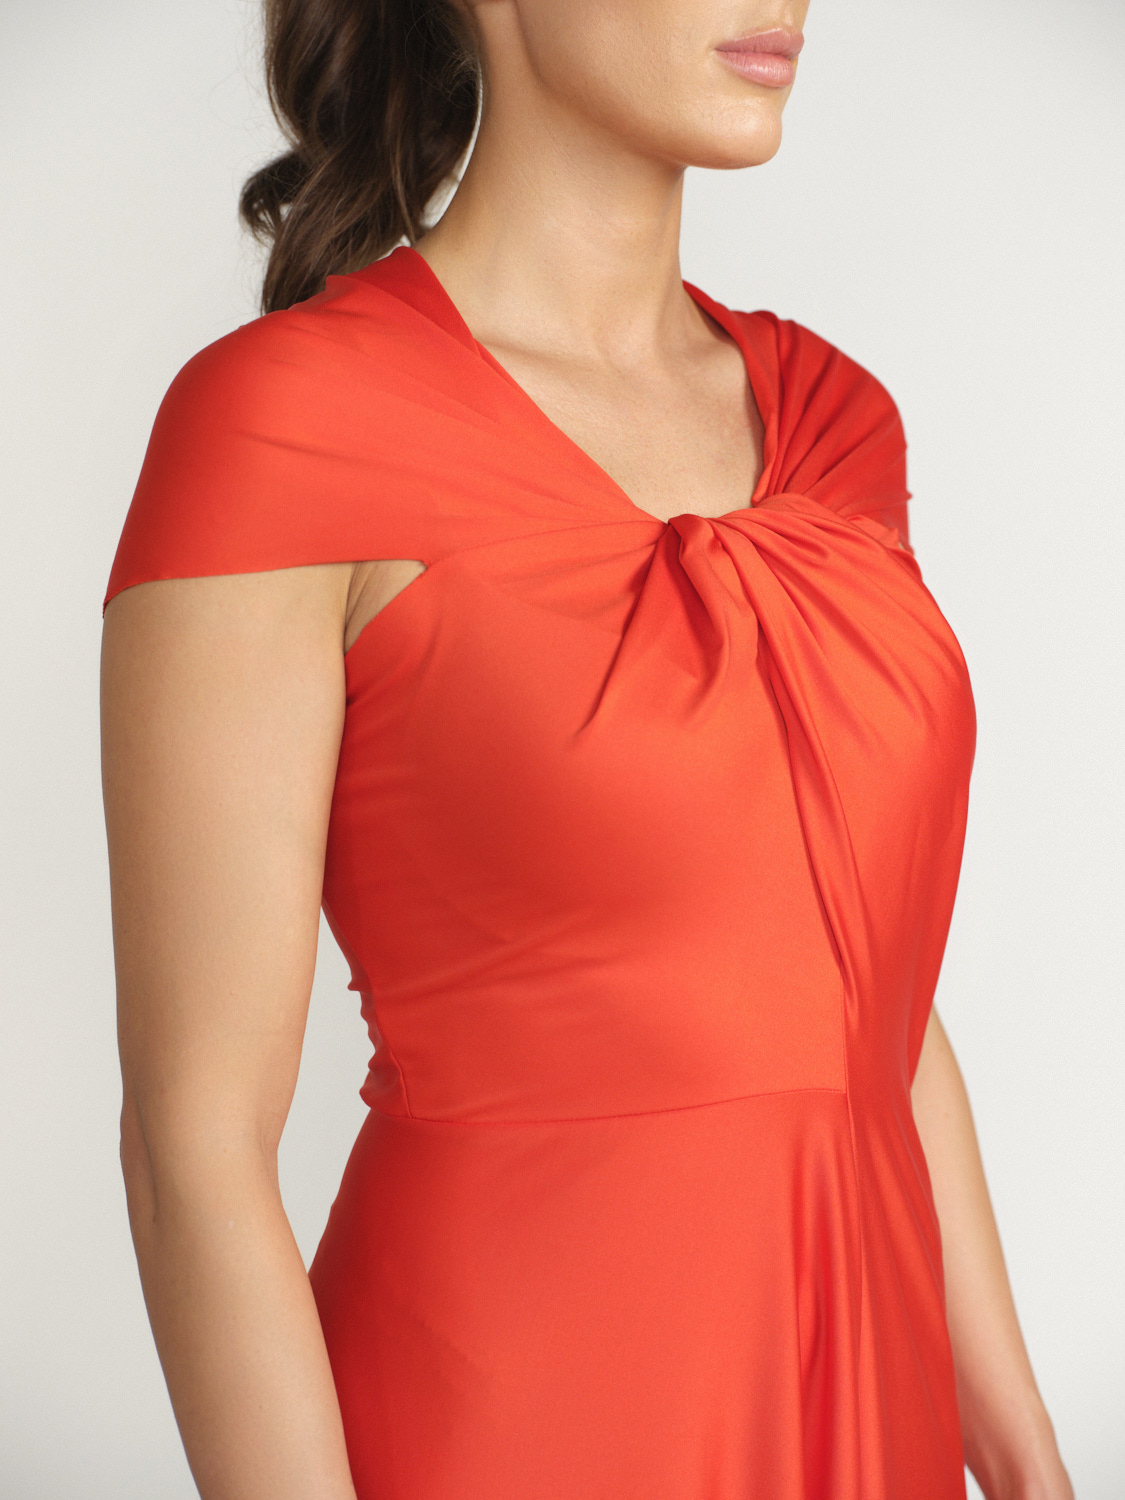 Victoria Beckham Sleeveless midi dress with knotted neckline detail red 36